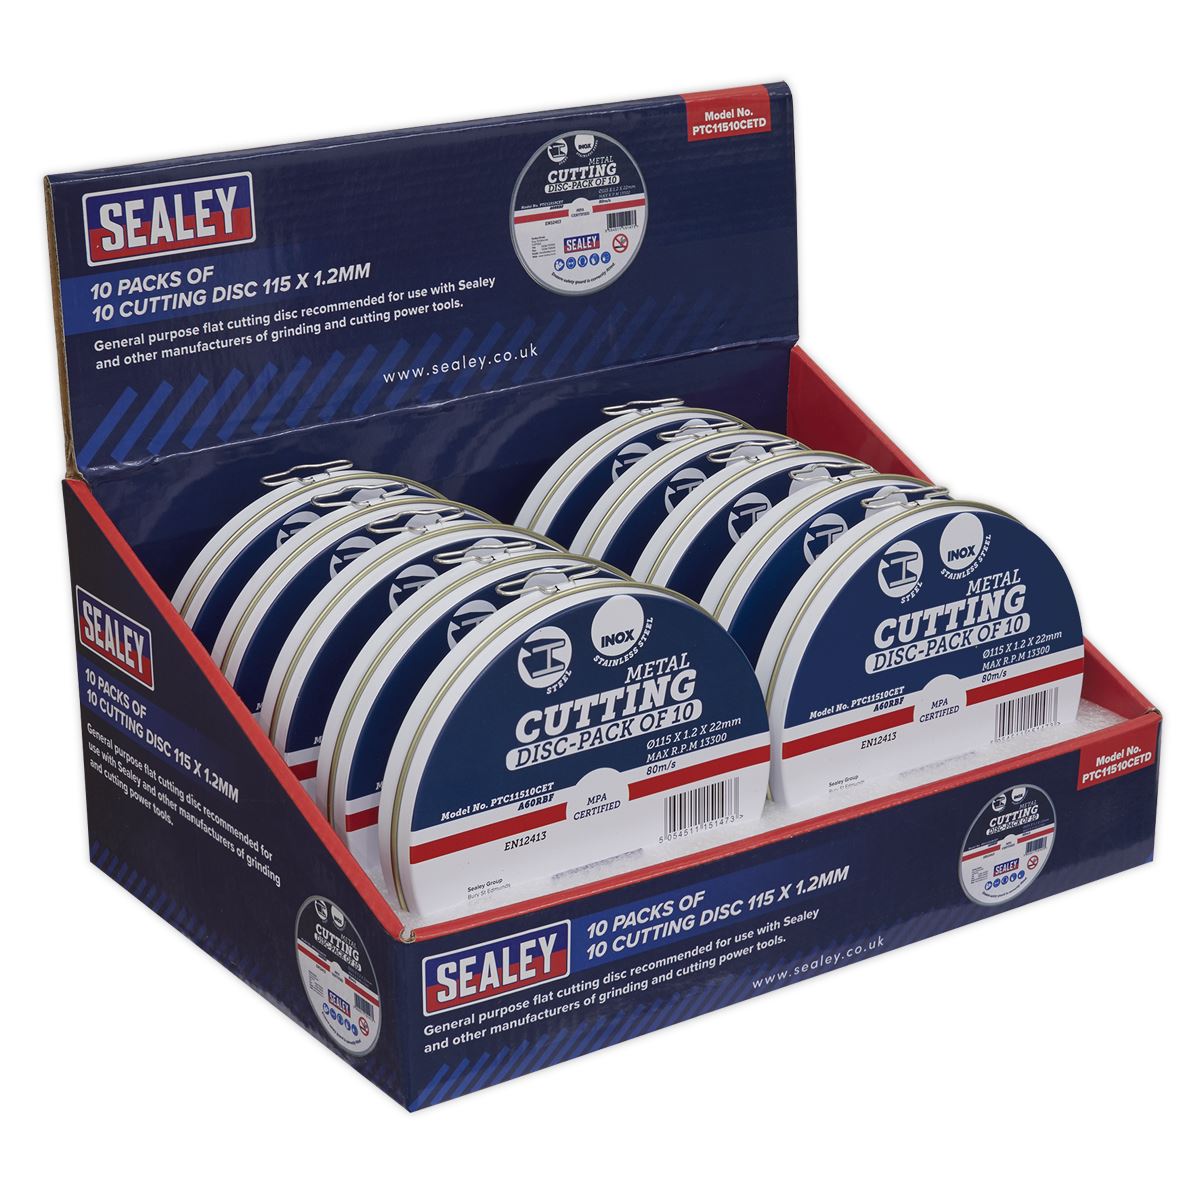 Sealey Cutting Disc 115 x 1.2mm Countertop Display Box 10 Packs of 10